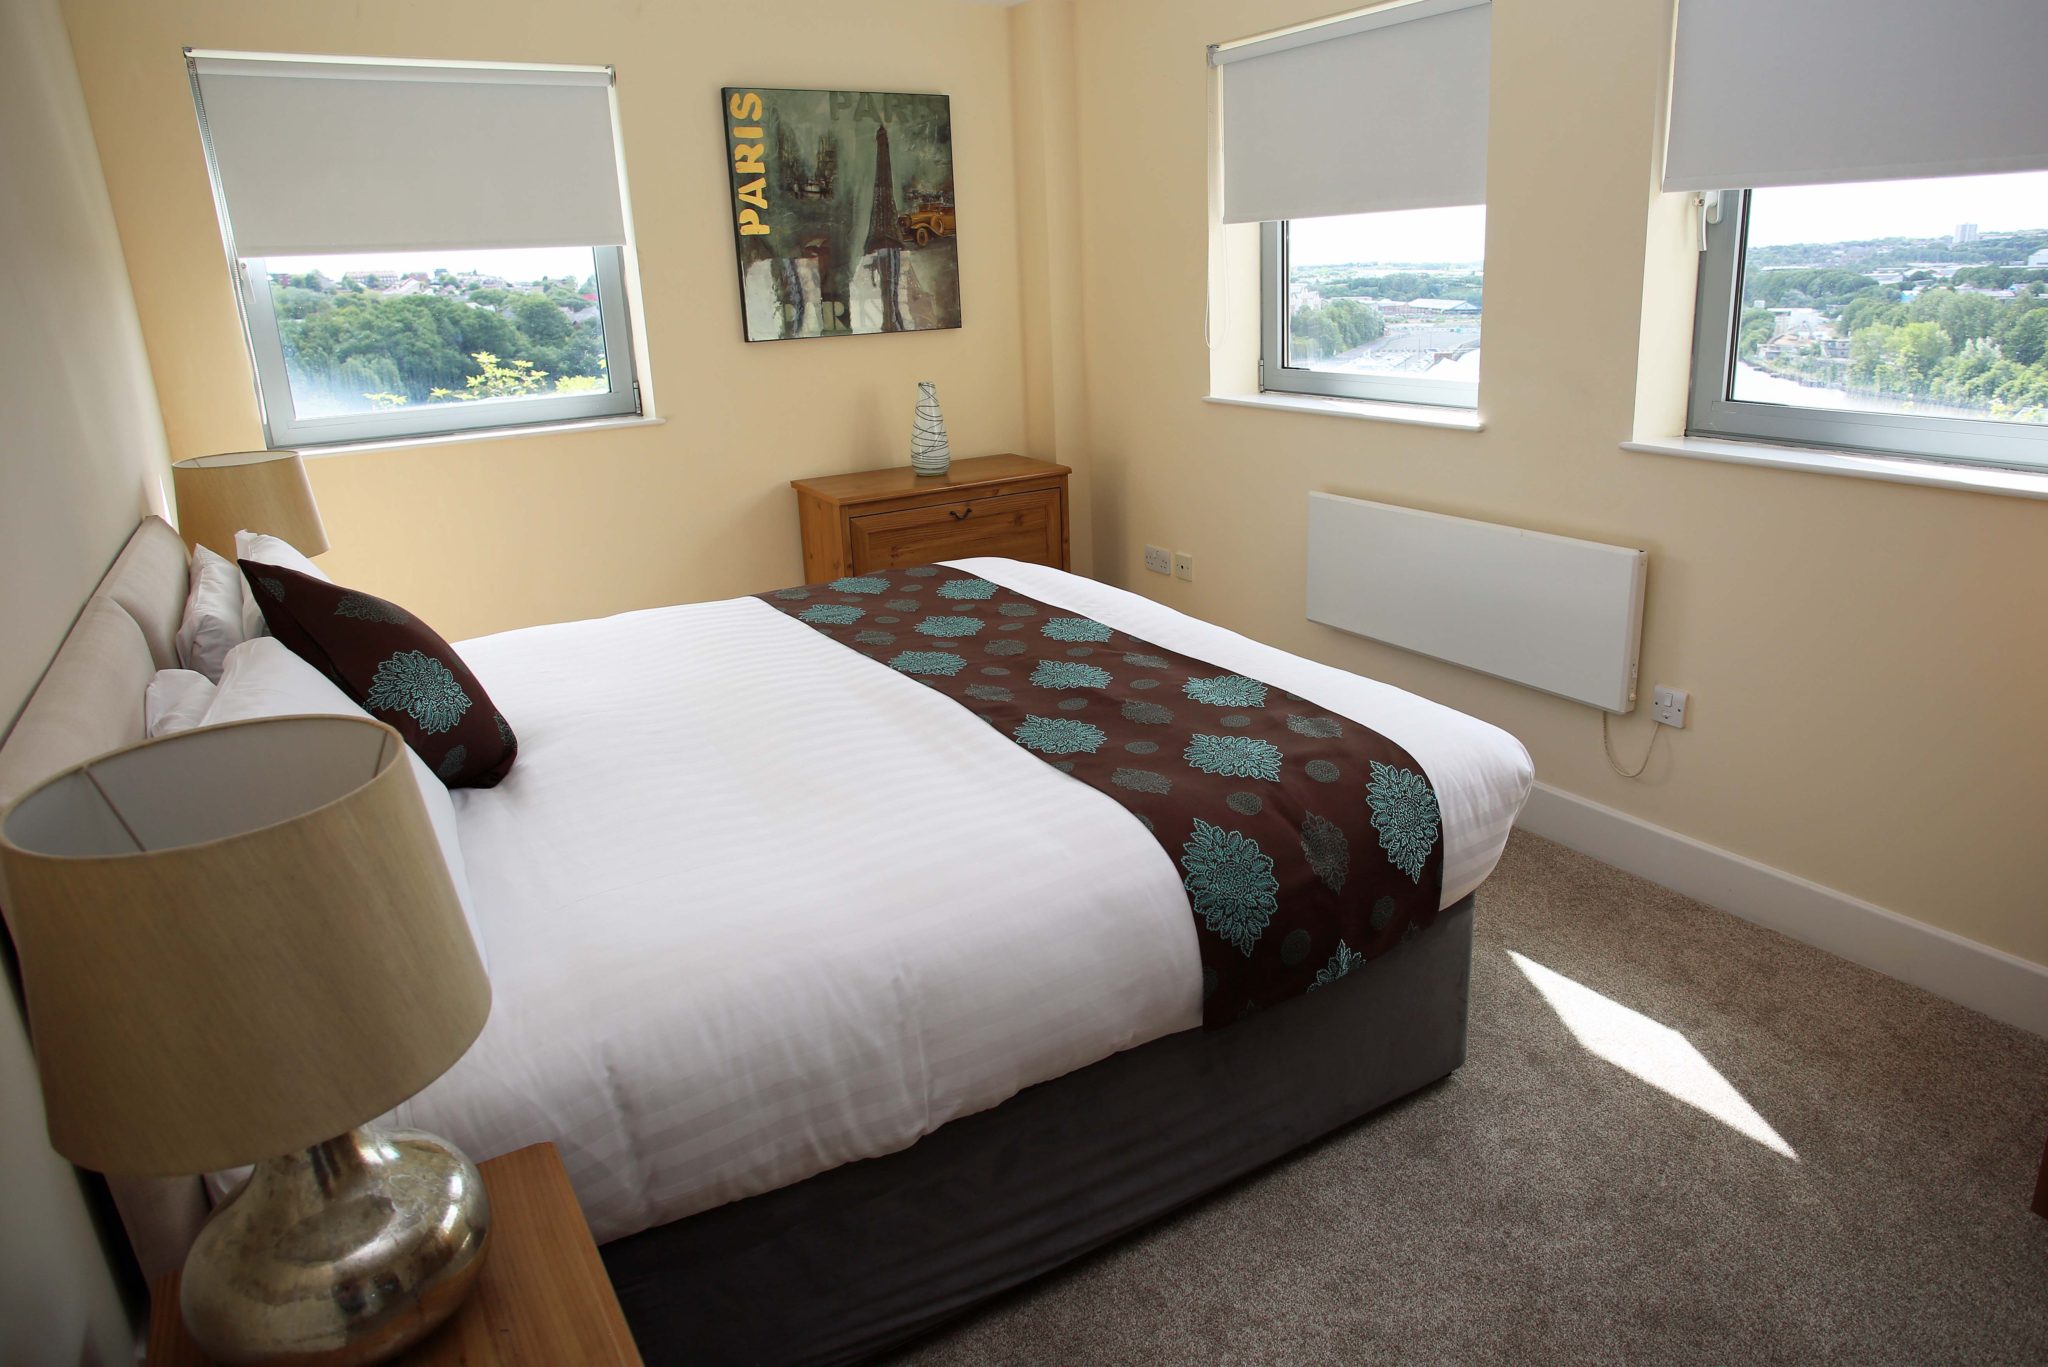 Modern-Newcastle Short-Stay-Apartments-available-from-today!-Book-Central-Newcastle-Accommodation-+-Wifi-+-Balcony,-incl-All-Bills-&-Fees!-Call:-02086913920-|-Urban-Stay